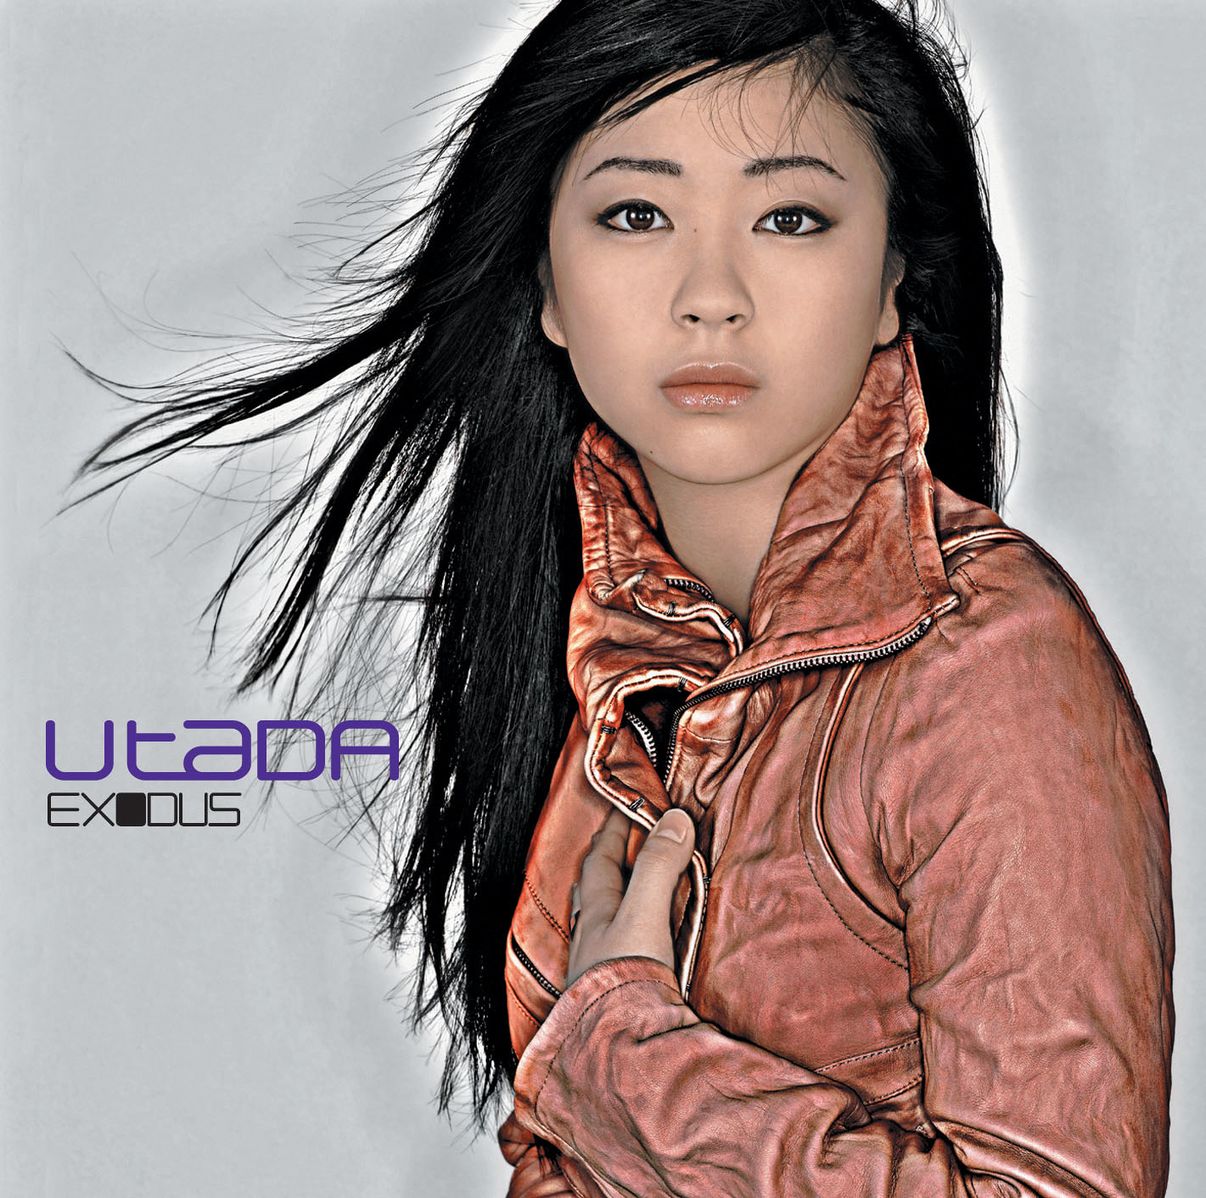 Utada — Let Me Give You My Love cover artwork